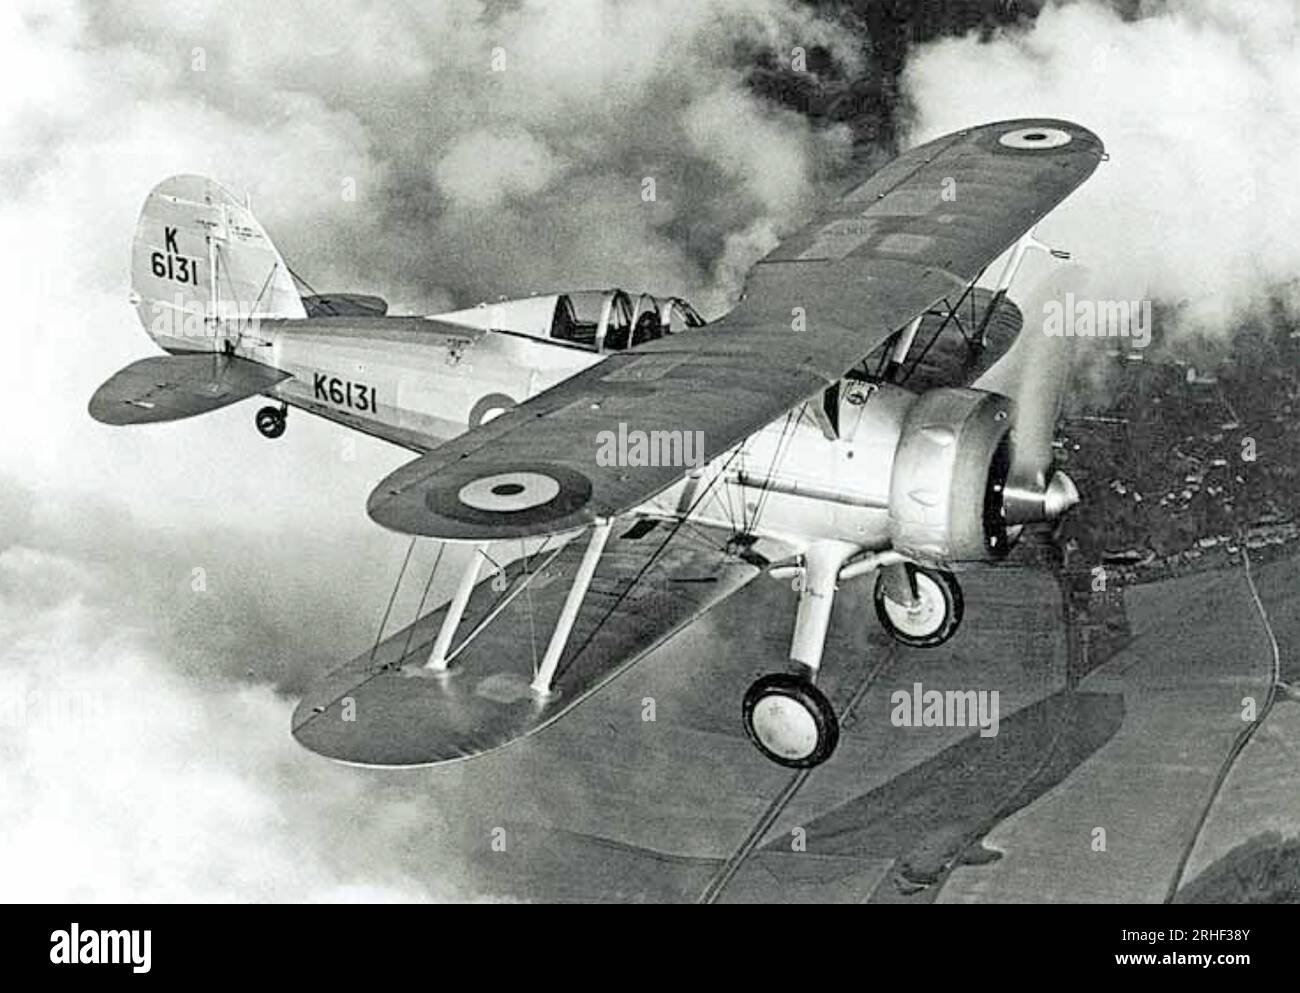 GLOSTER GLADIATOR  Mk 1  K6131 of 72 Squadron RAF. It was delivered in to 72 Squadron RAF at Church Fenton in February 1938 but struck off charge after it crashed after running out of fuel on 26 March 1938. Stock Photo